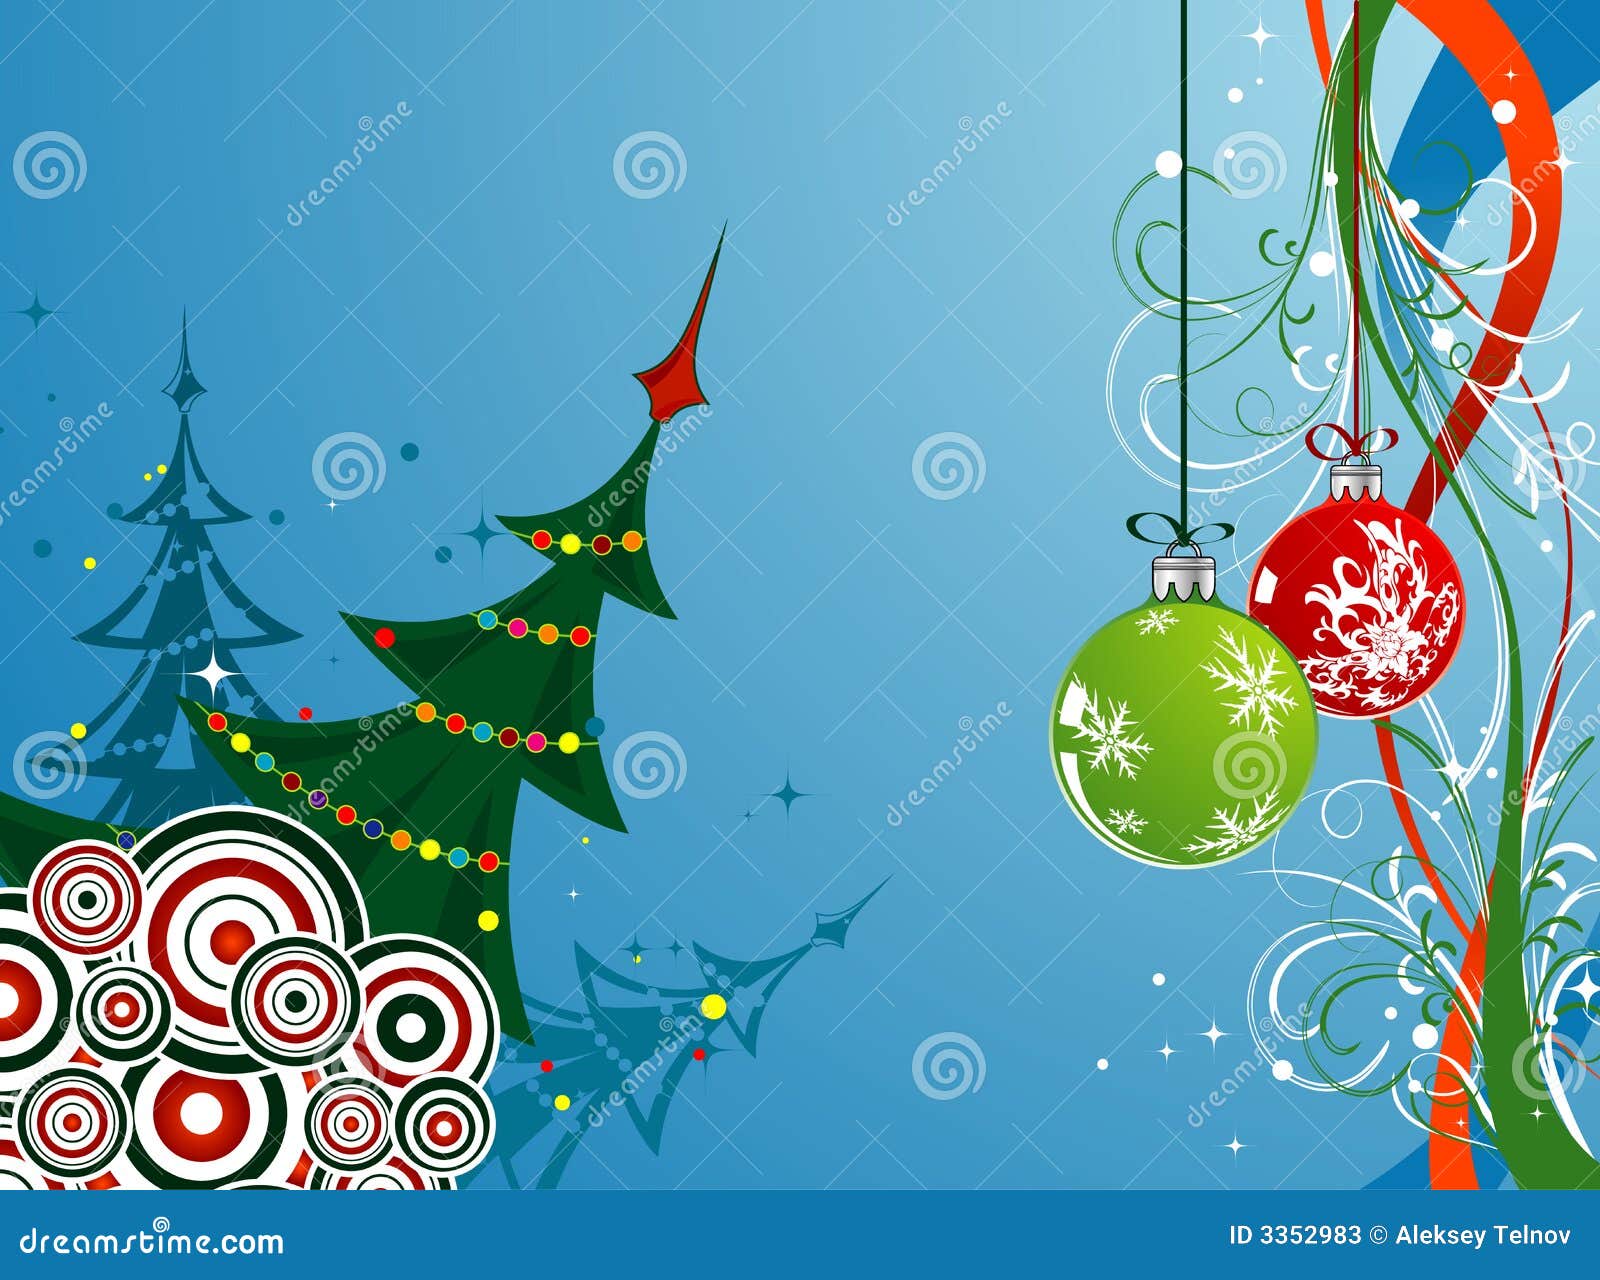 Christmas background stock vector. Illustration of abstract - 3352983